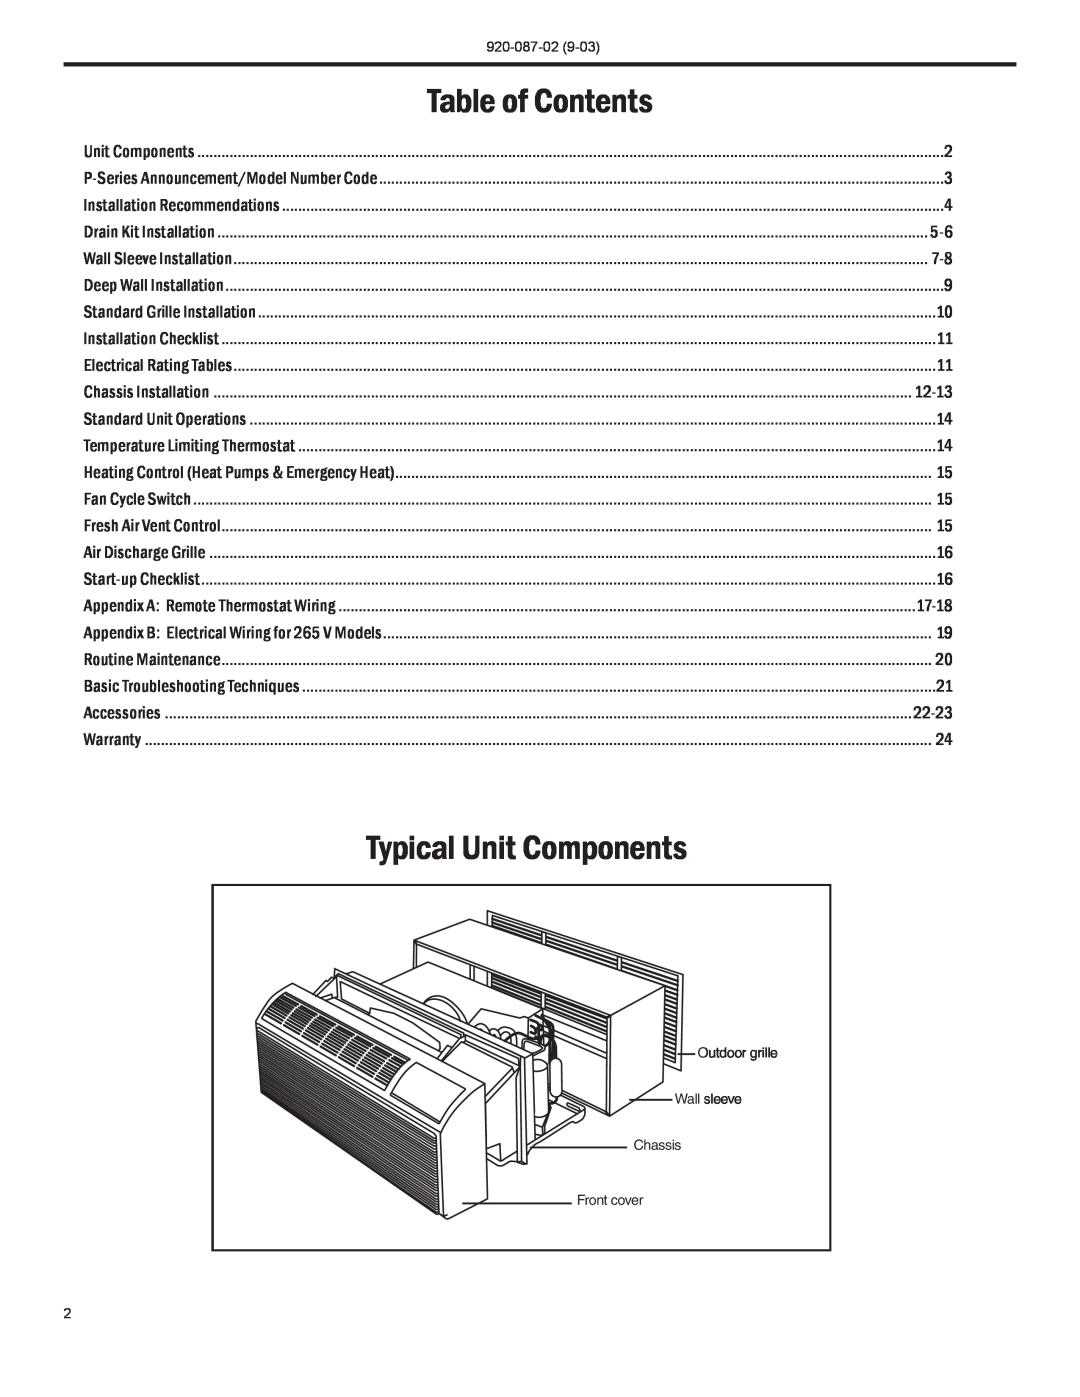 Friedrich PTAC operation manual Typical Unit Components, Table of Contents 